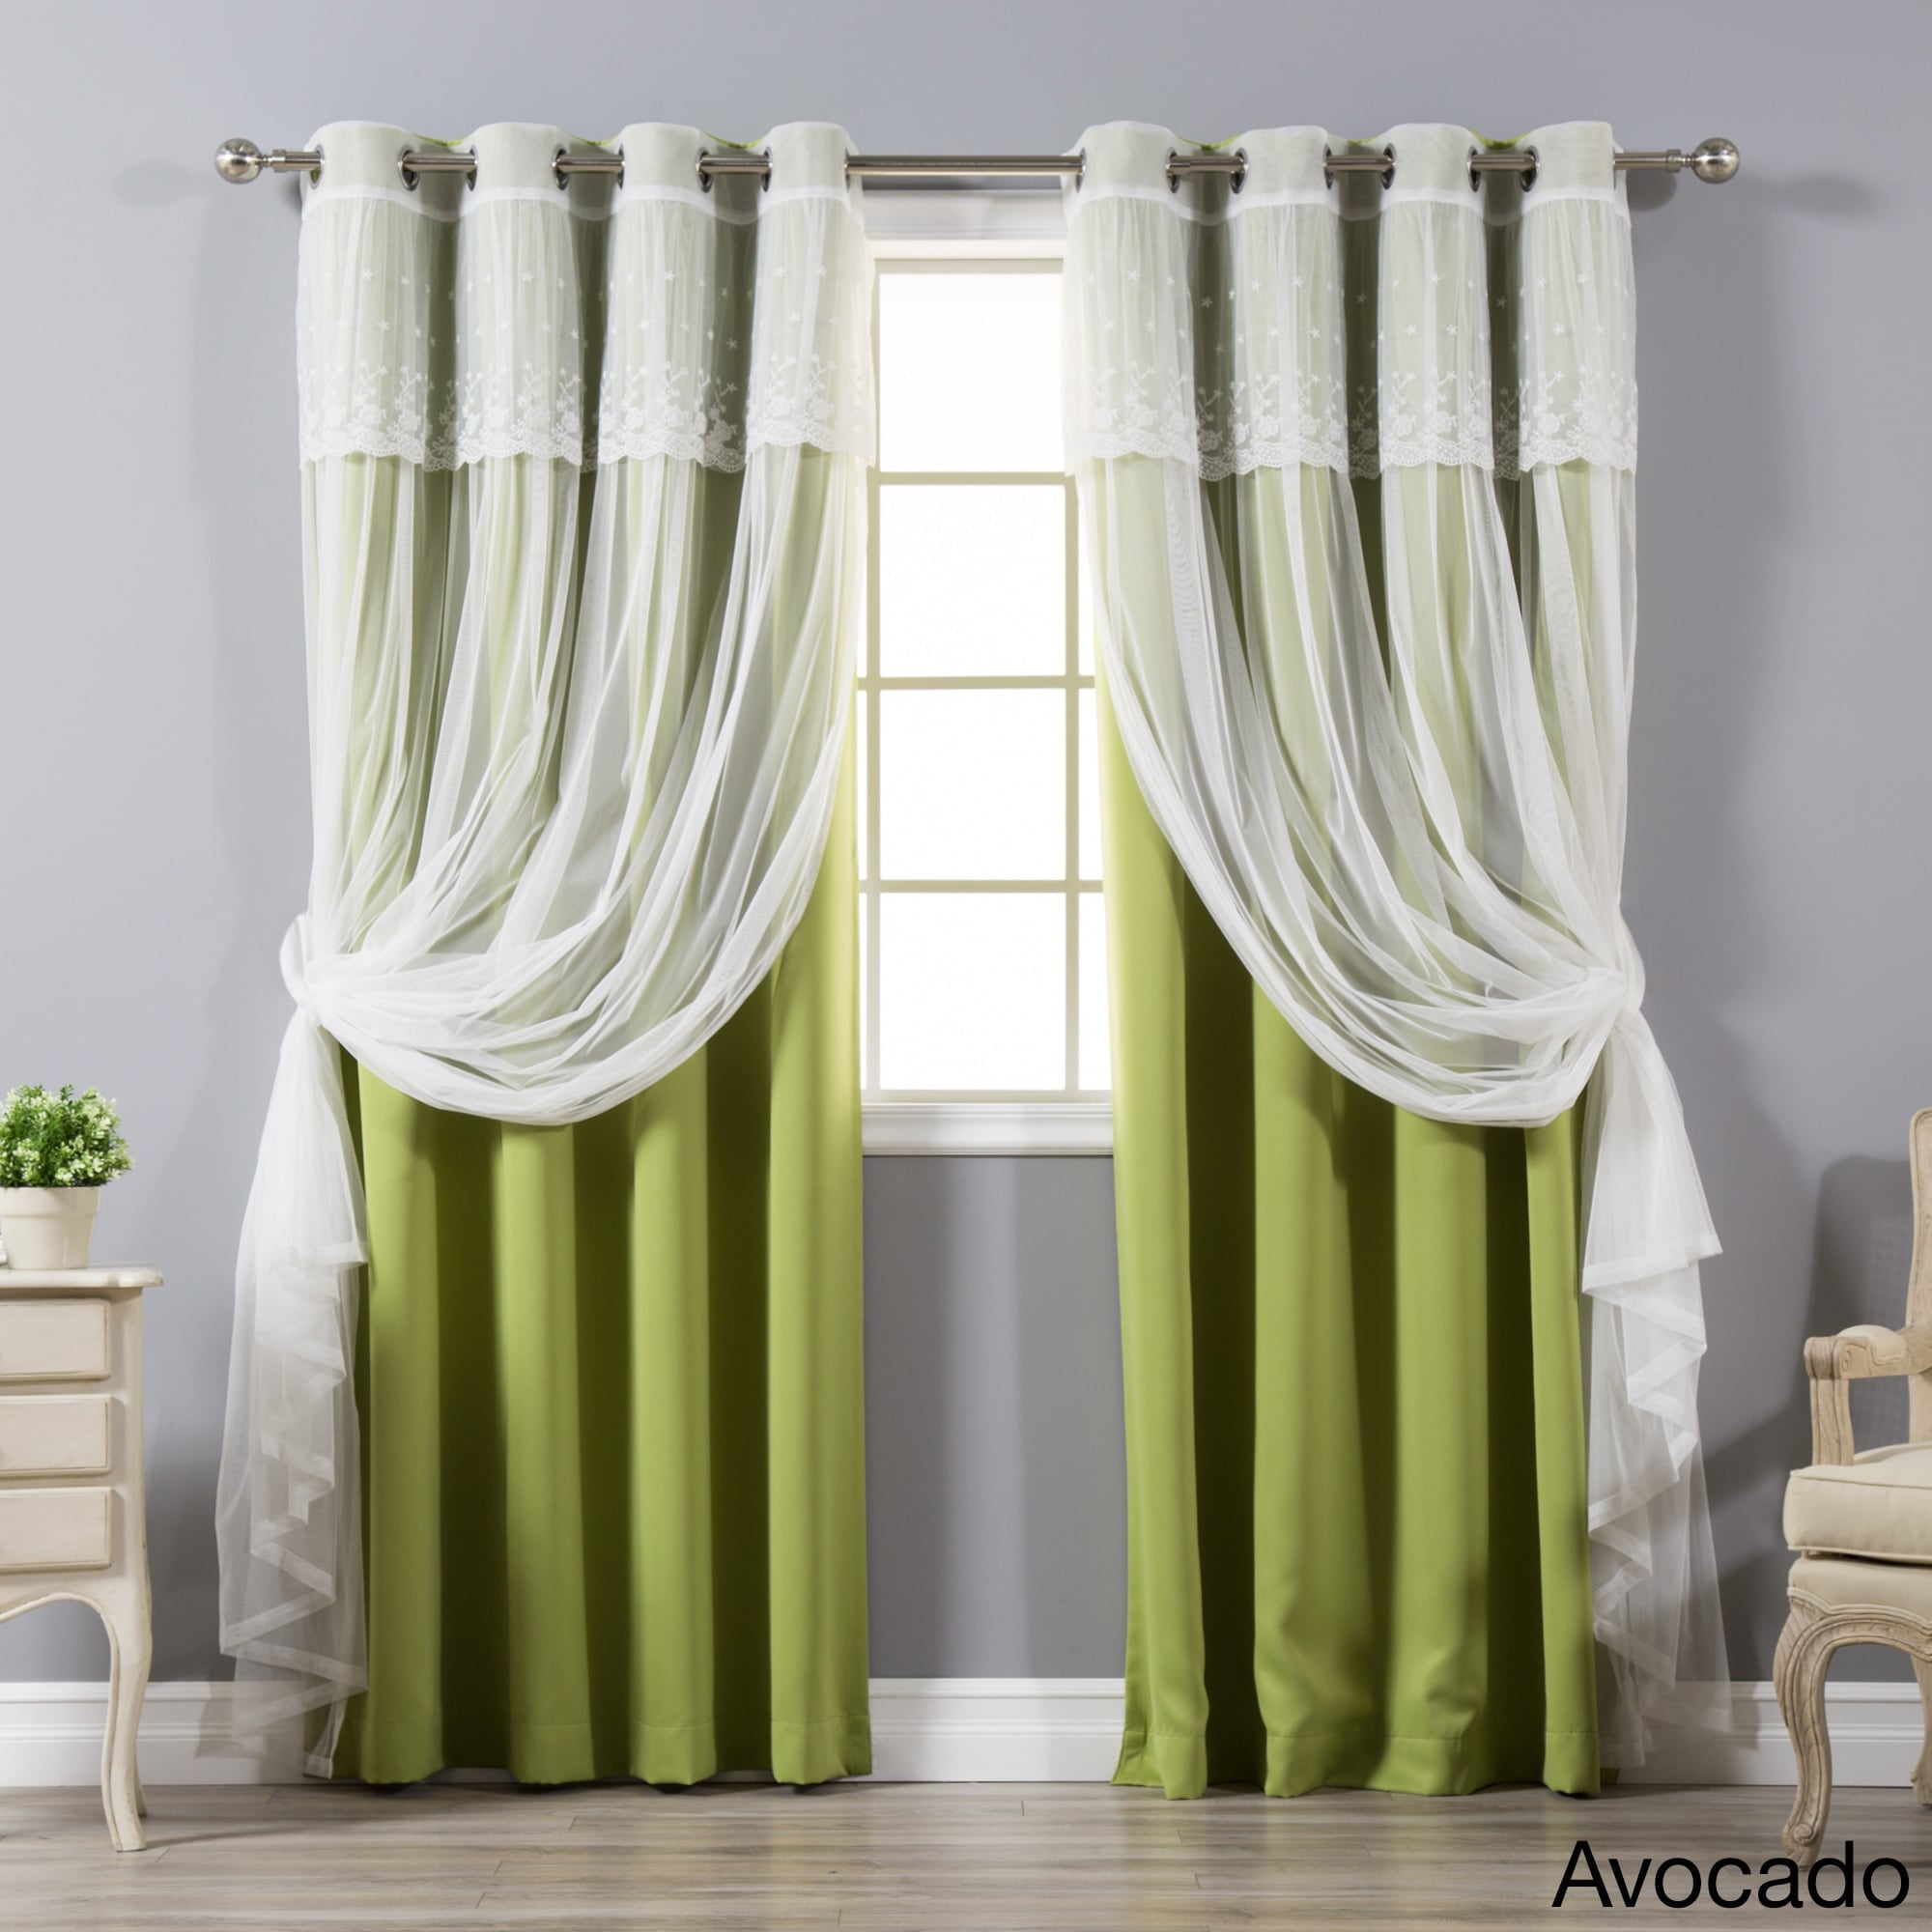 Aurora Home Mix and Match Tulle Sheer With Attached Valance And Blackout Panel 